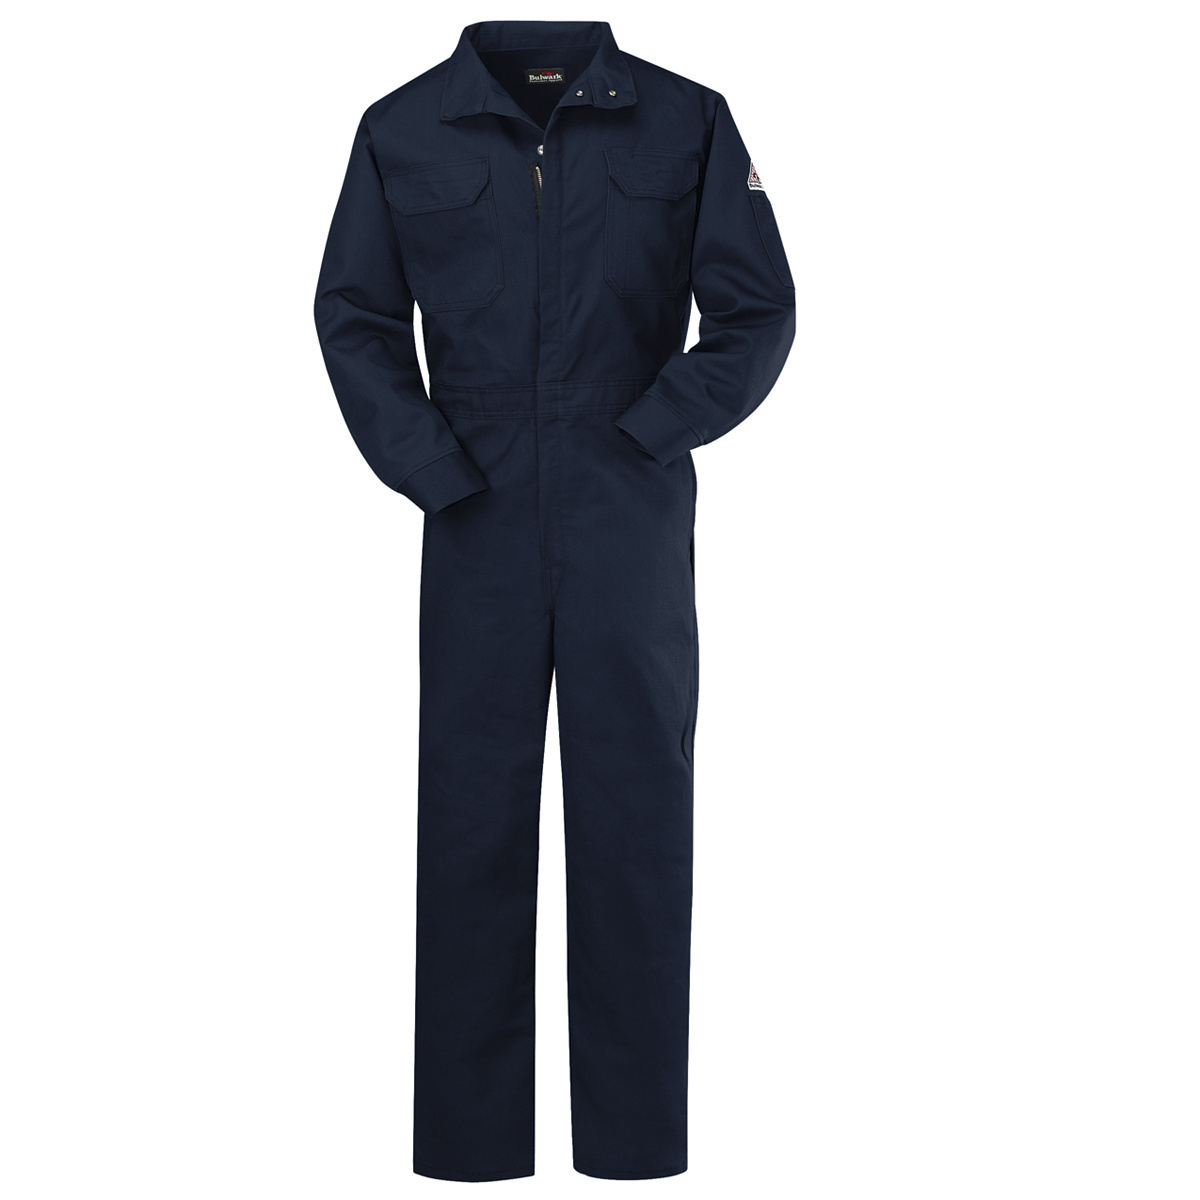 Bulwark® 52 Regular Navy Blue Westex Ultrasoft®/Cotton/Nylon Flame Resistant Coveralls With Zipper Front Closure